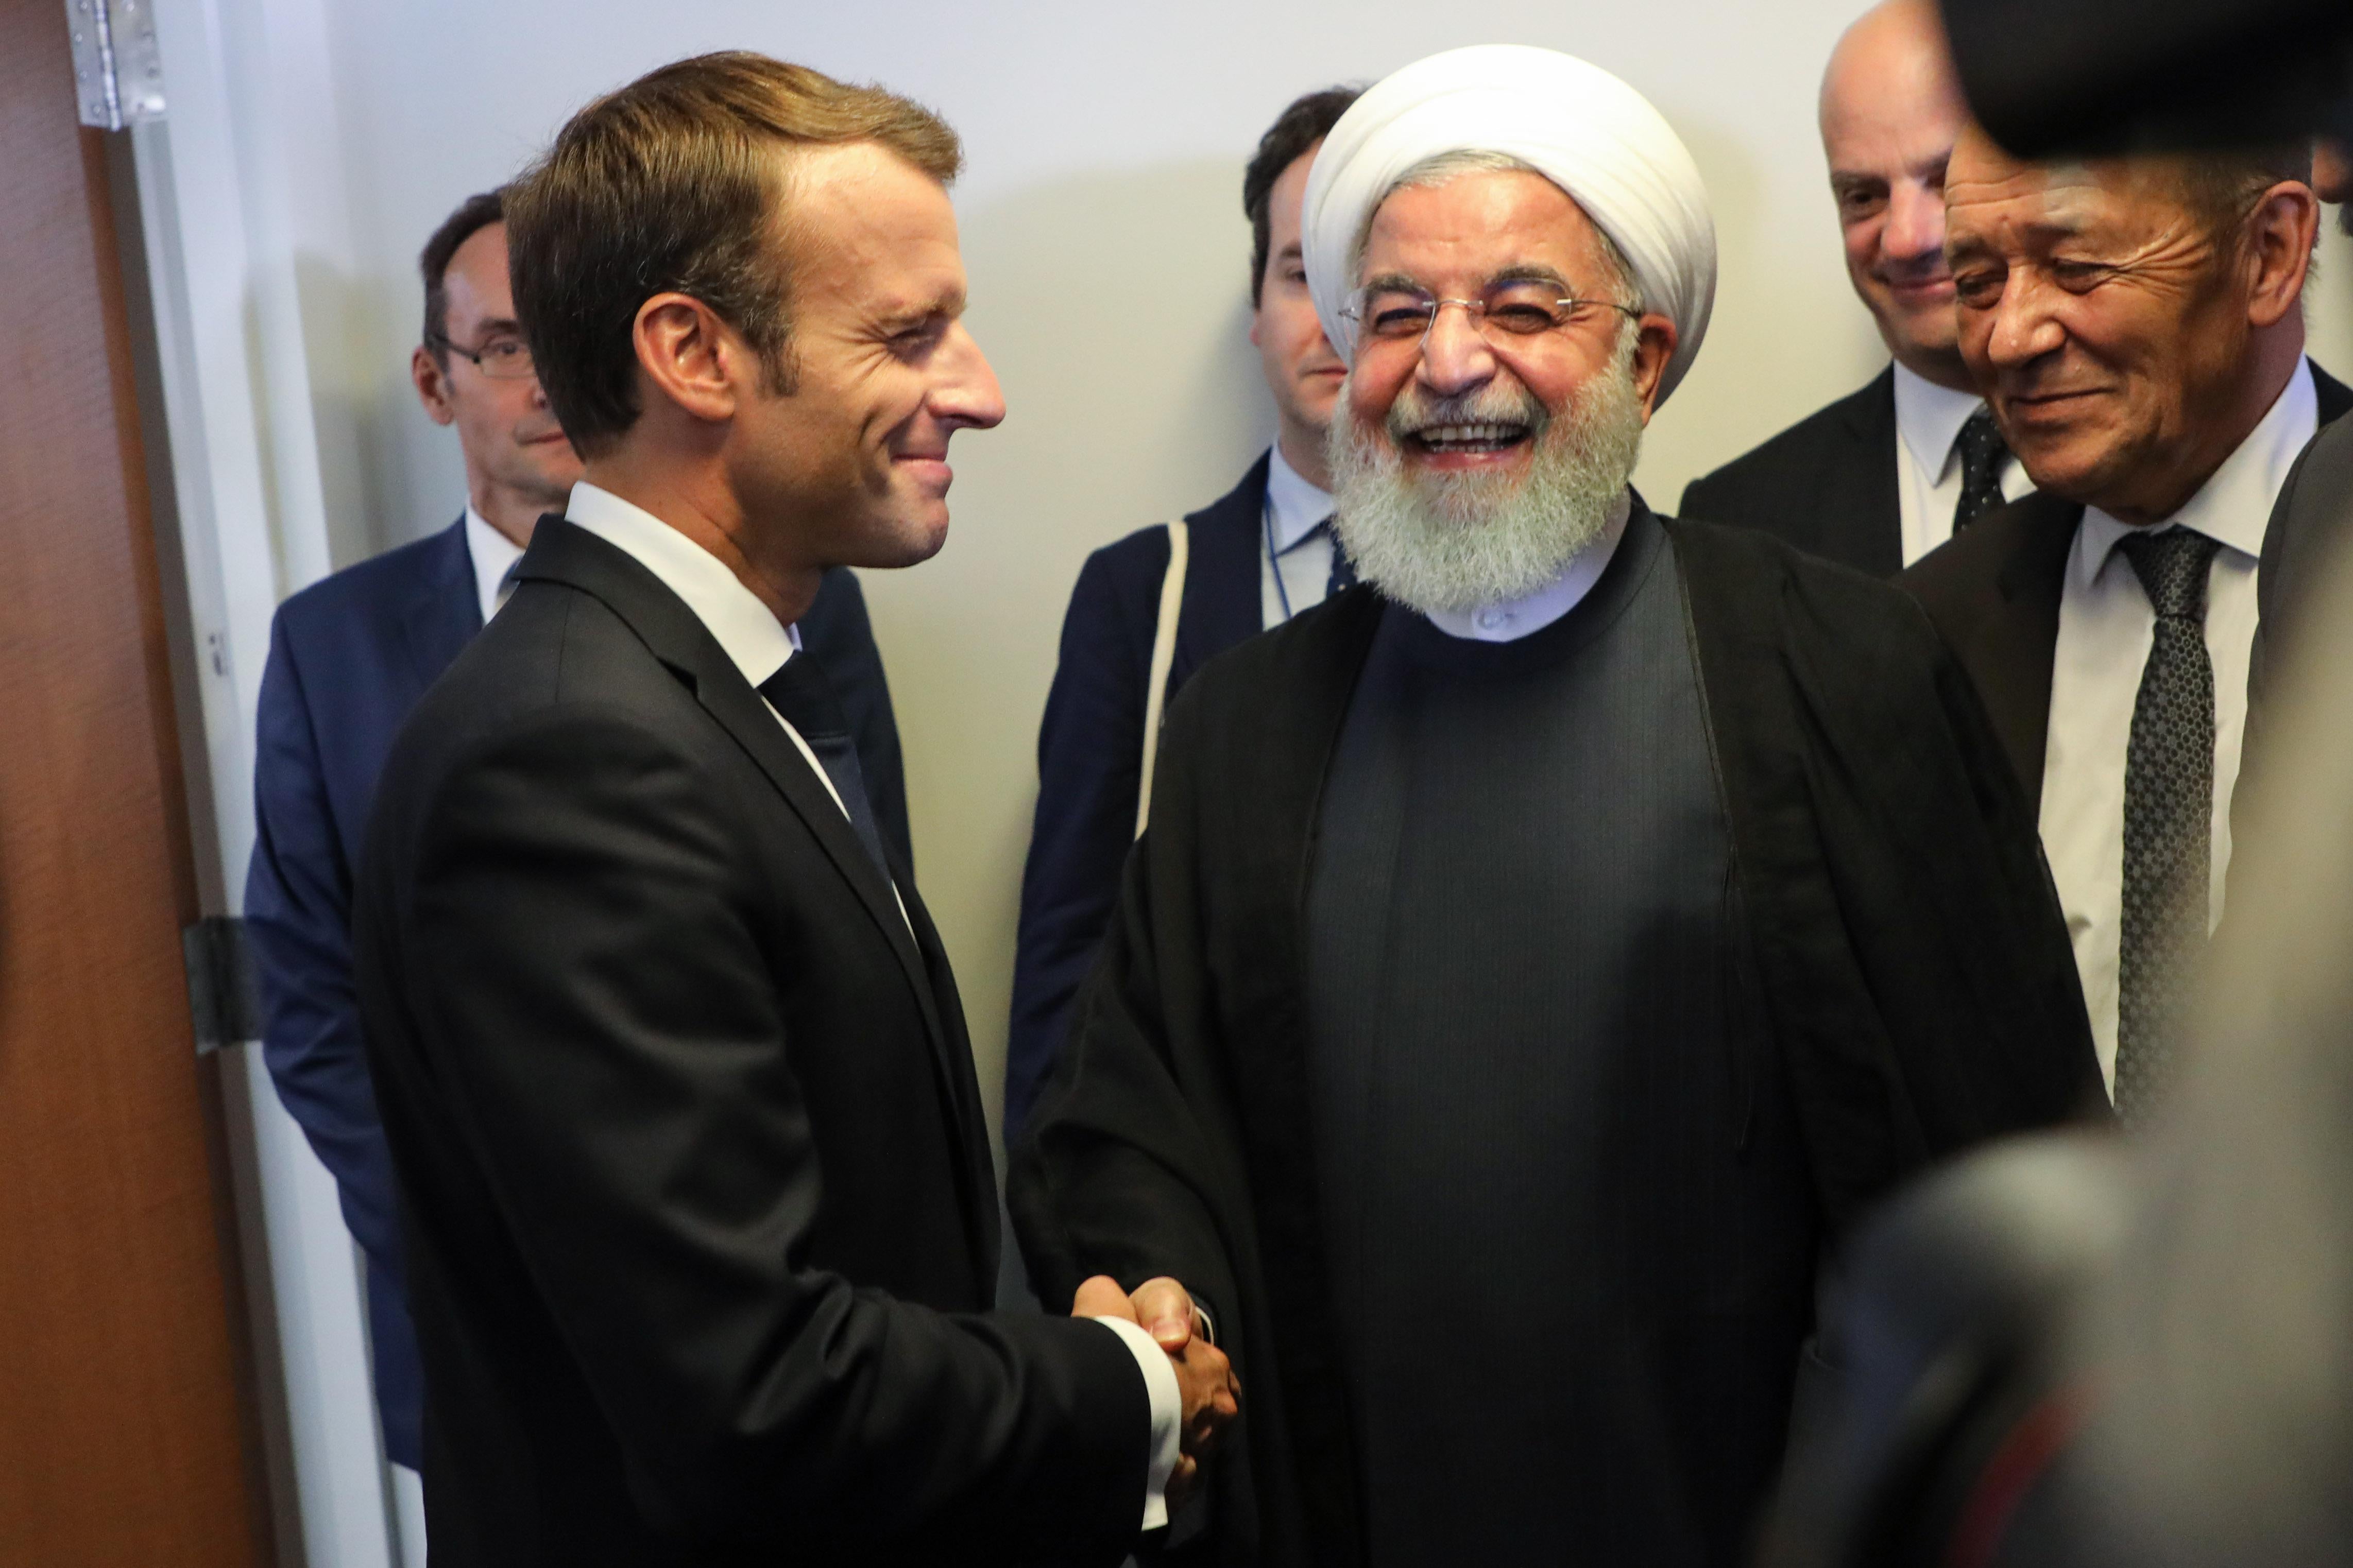 Macron shaking hands with Rouhani.